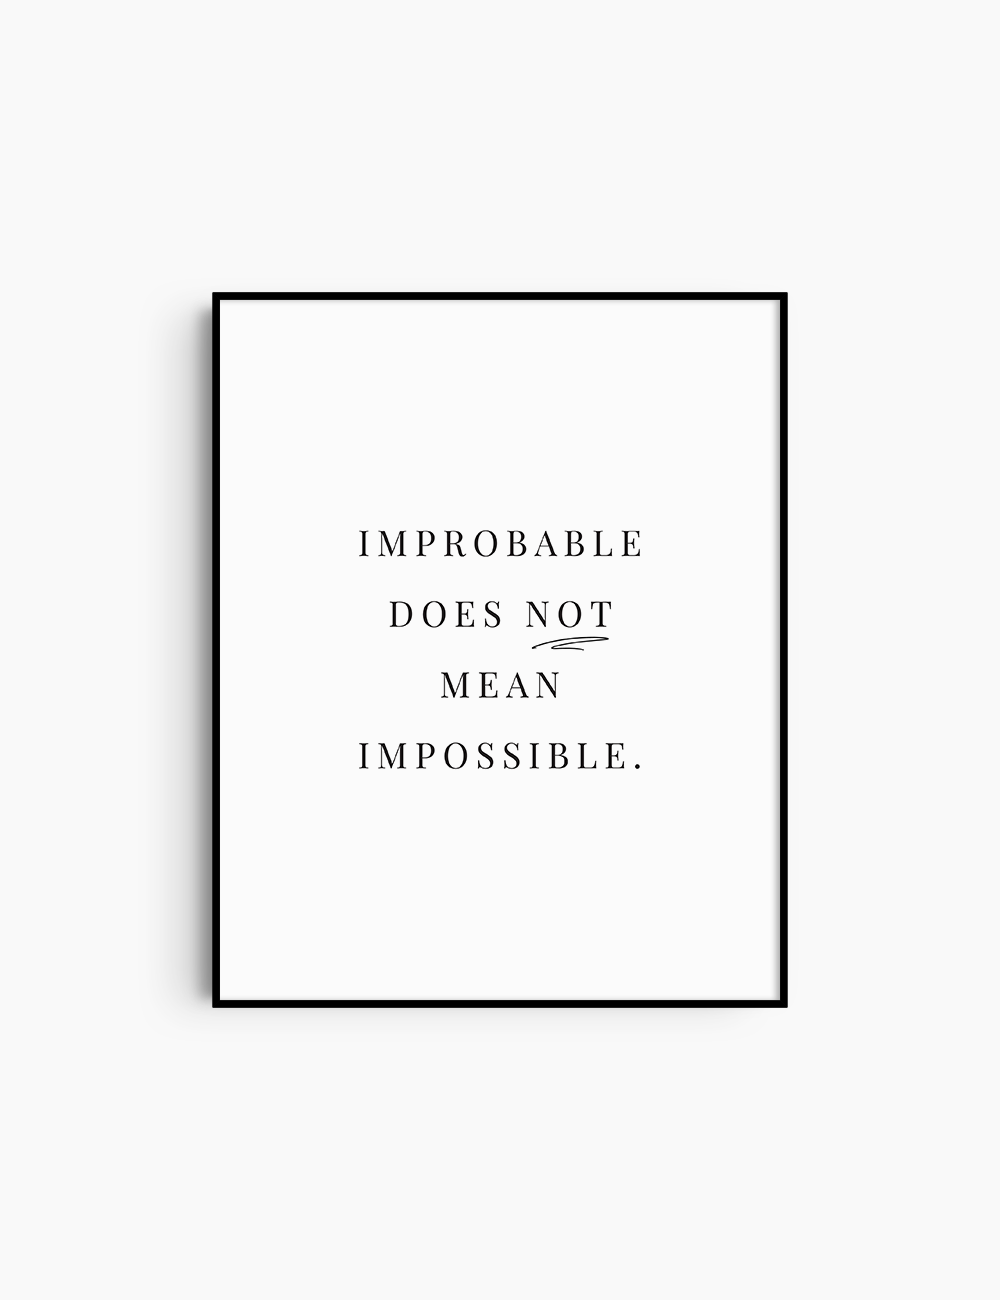 IMPROBABLE DOES NOT MEAN IMPOSSIBLE. Printable Wall Art Quote. Custom Design. 